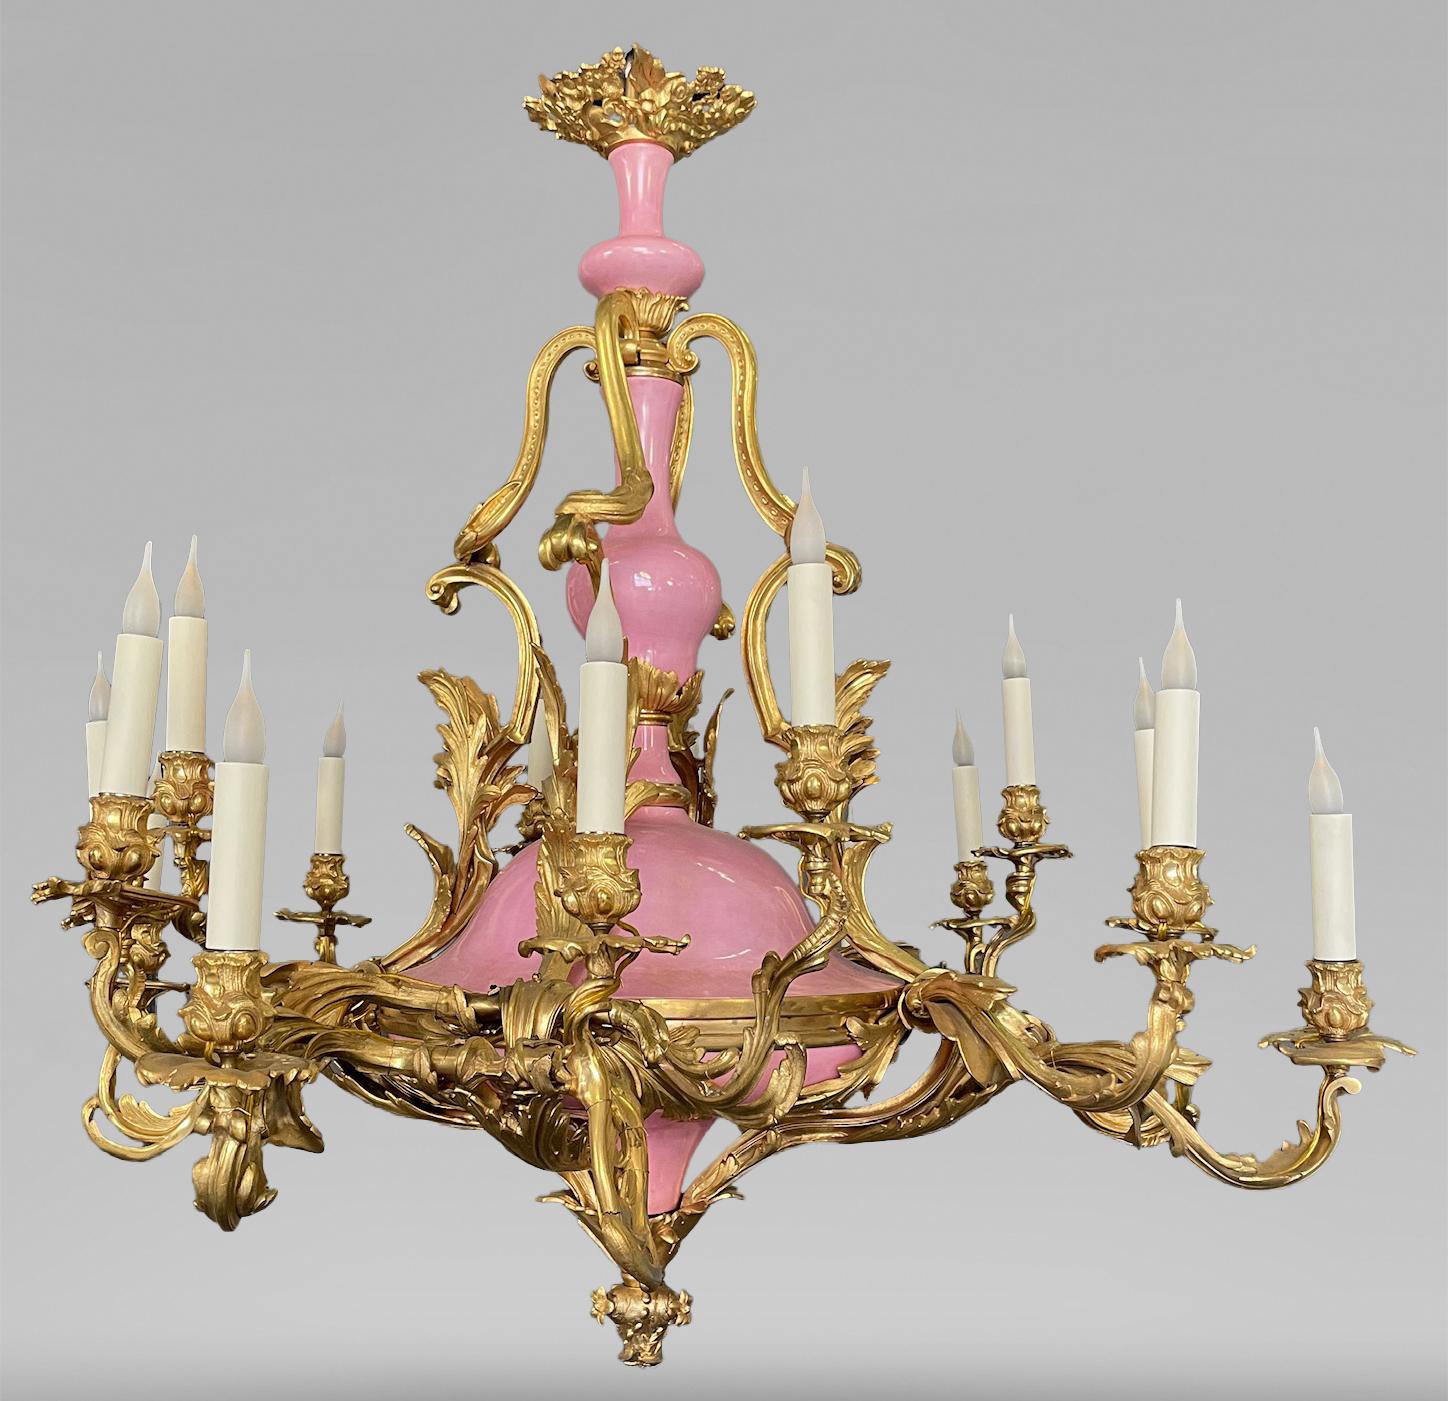 These blue and pink chandeliers are made in gilt bronze and porcelain and form a very special pair, characteristic of the decorative art under Napoleon III in late 19th century. The central porcelain shaft is composed of three balusters, which are